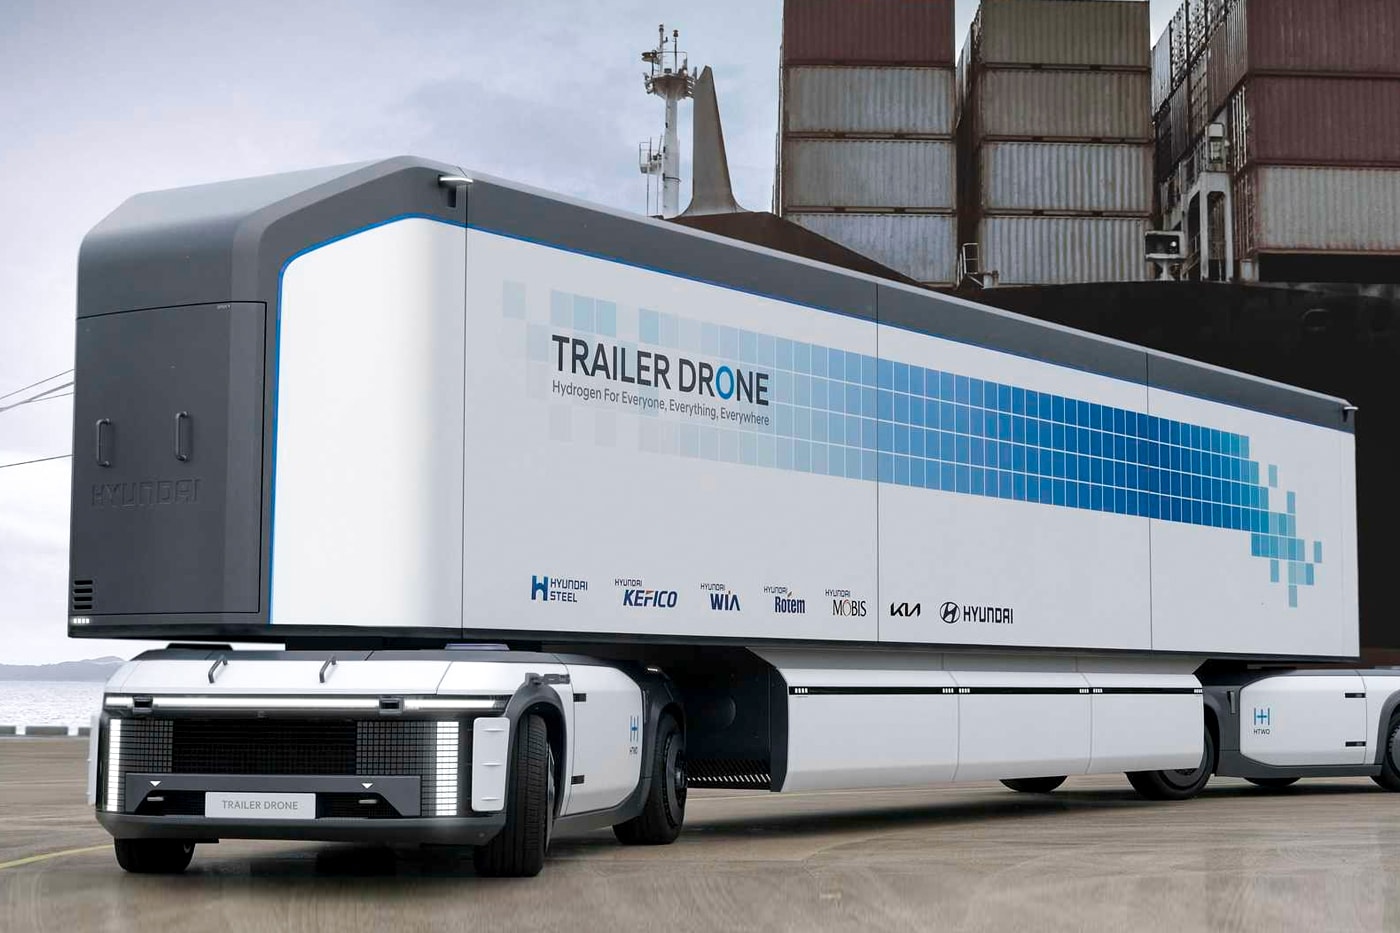 Hyundai Presents its Vision for Hydrogen-Based Mobillity e-bogie Hydrogen Wave 2040 2028 fuel cell energy vision FK truck container south korea public transport logistics concept trailer drone future news